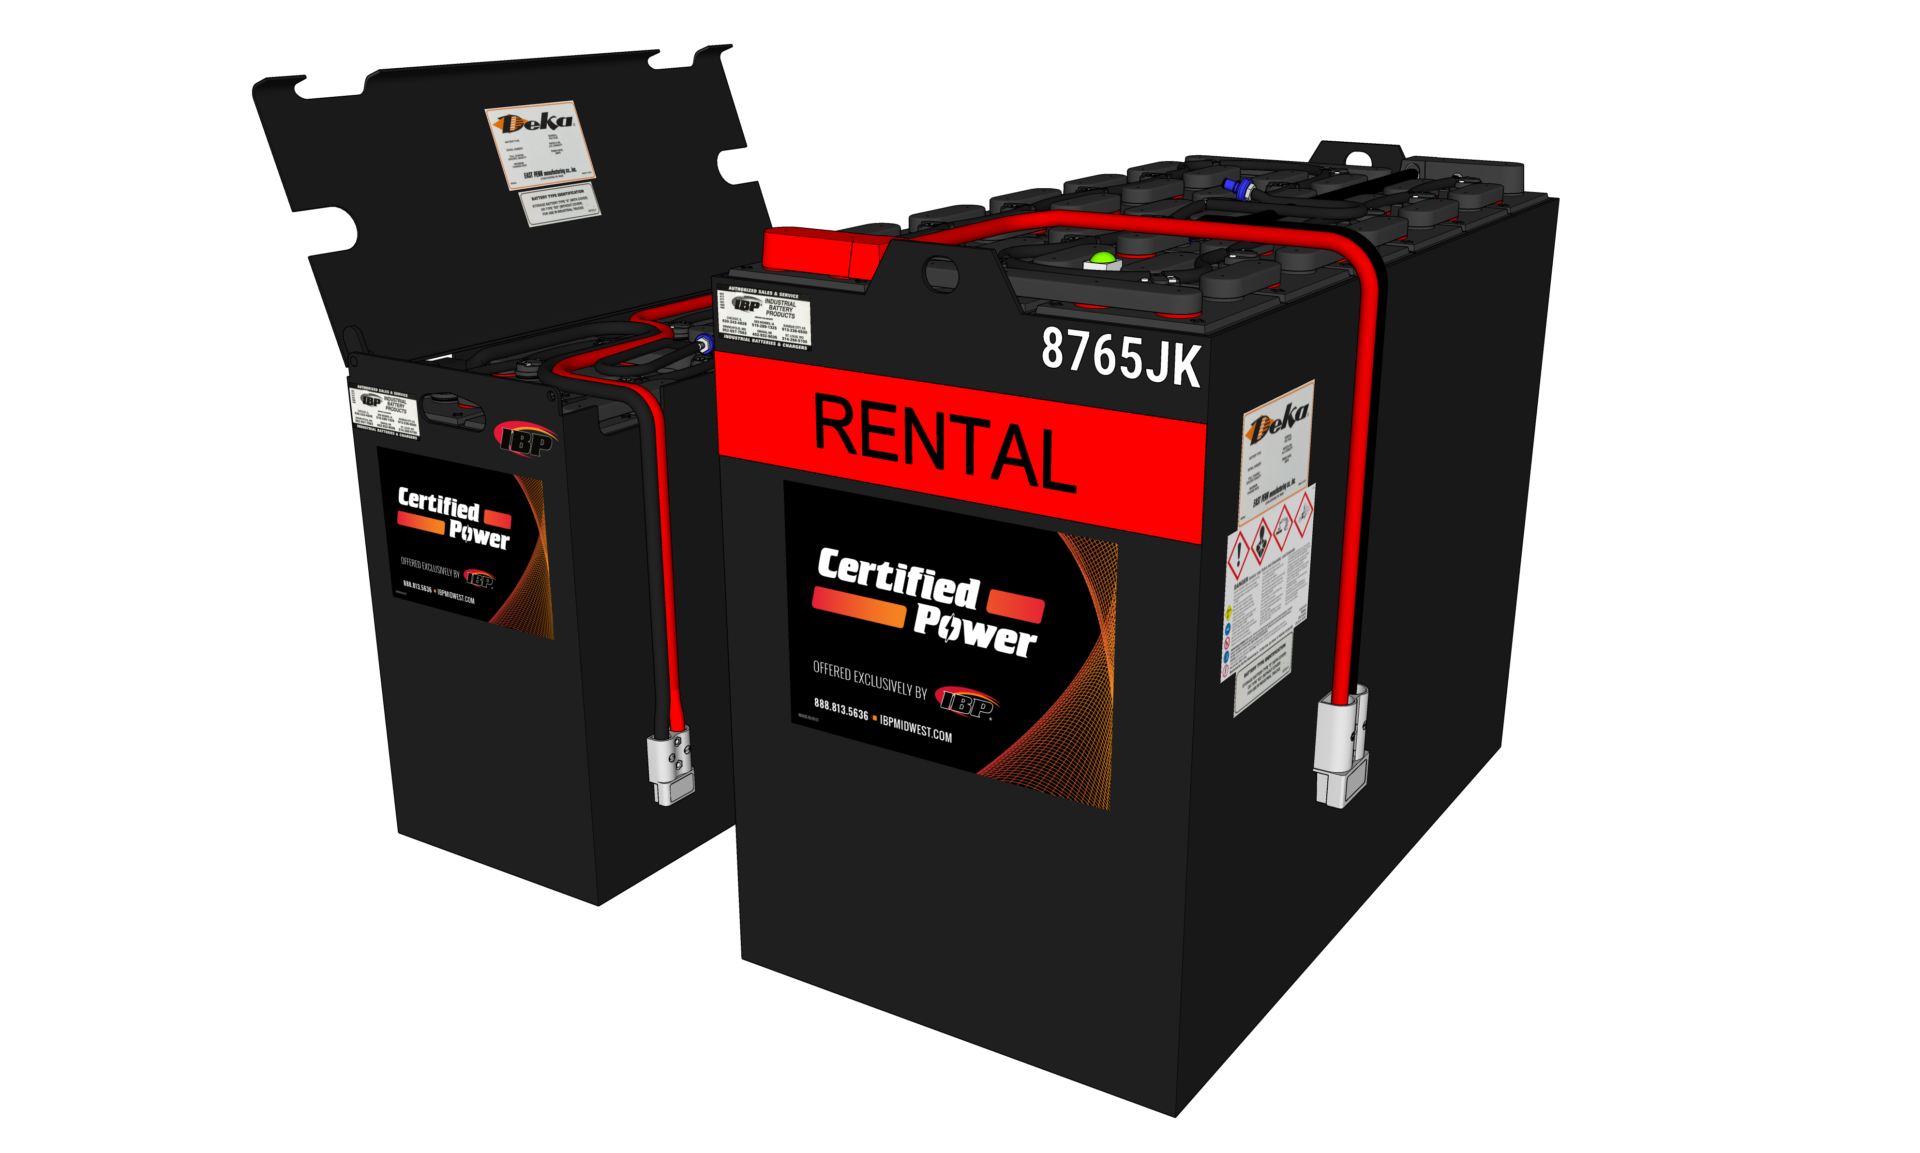 A rental battery for industrial equipment